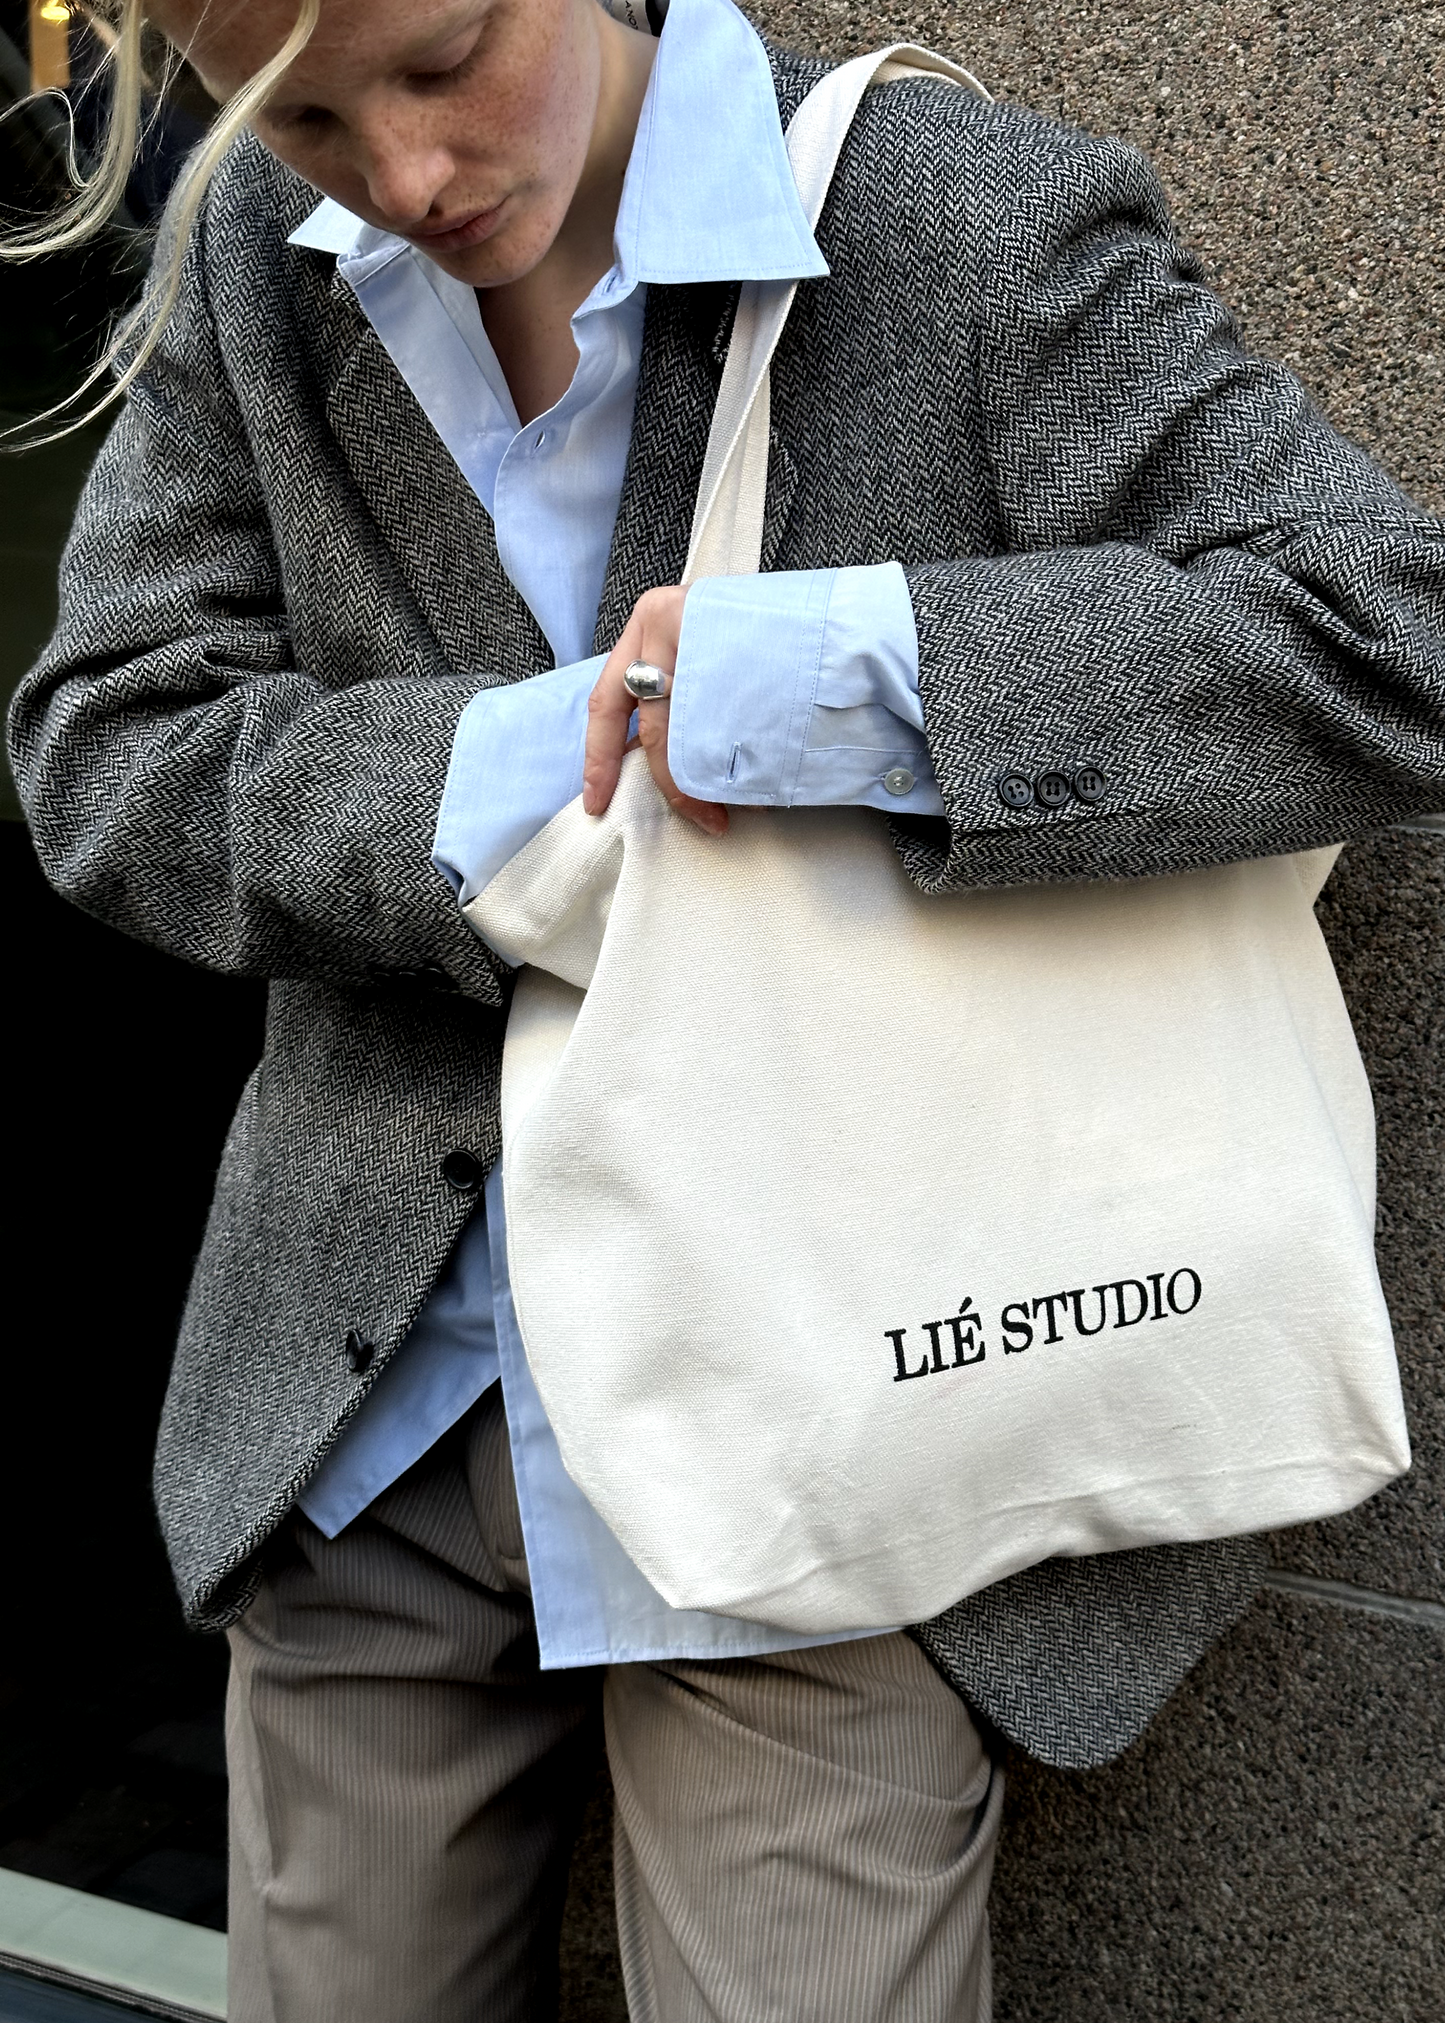 The Canvas Tote Bag